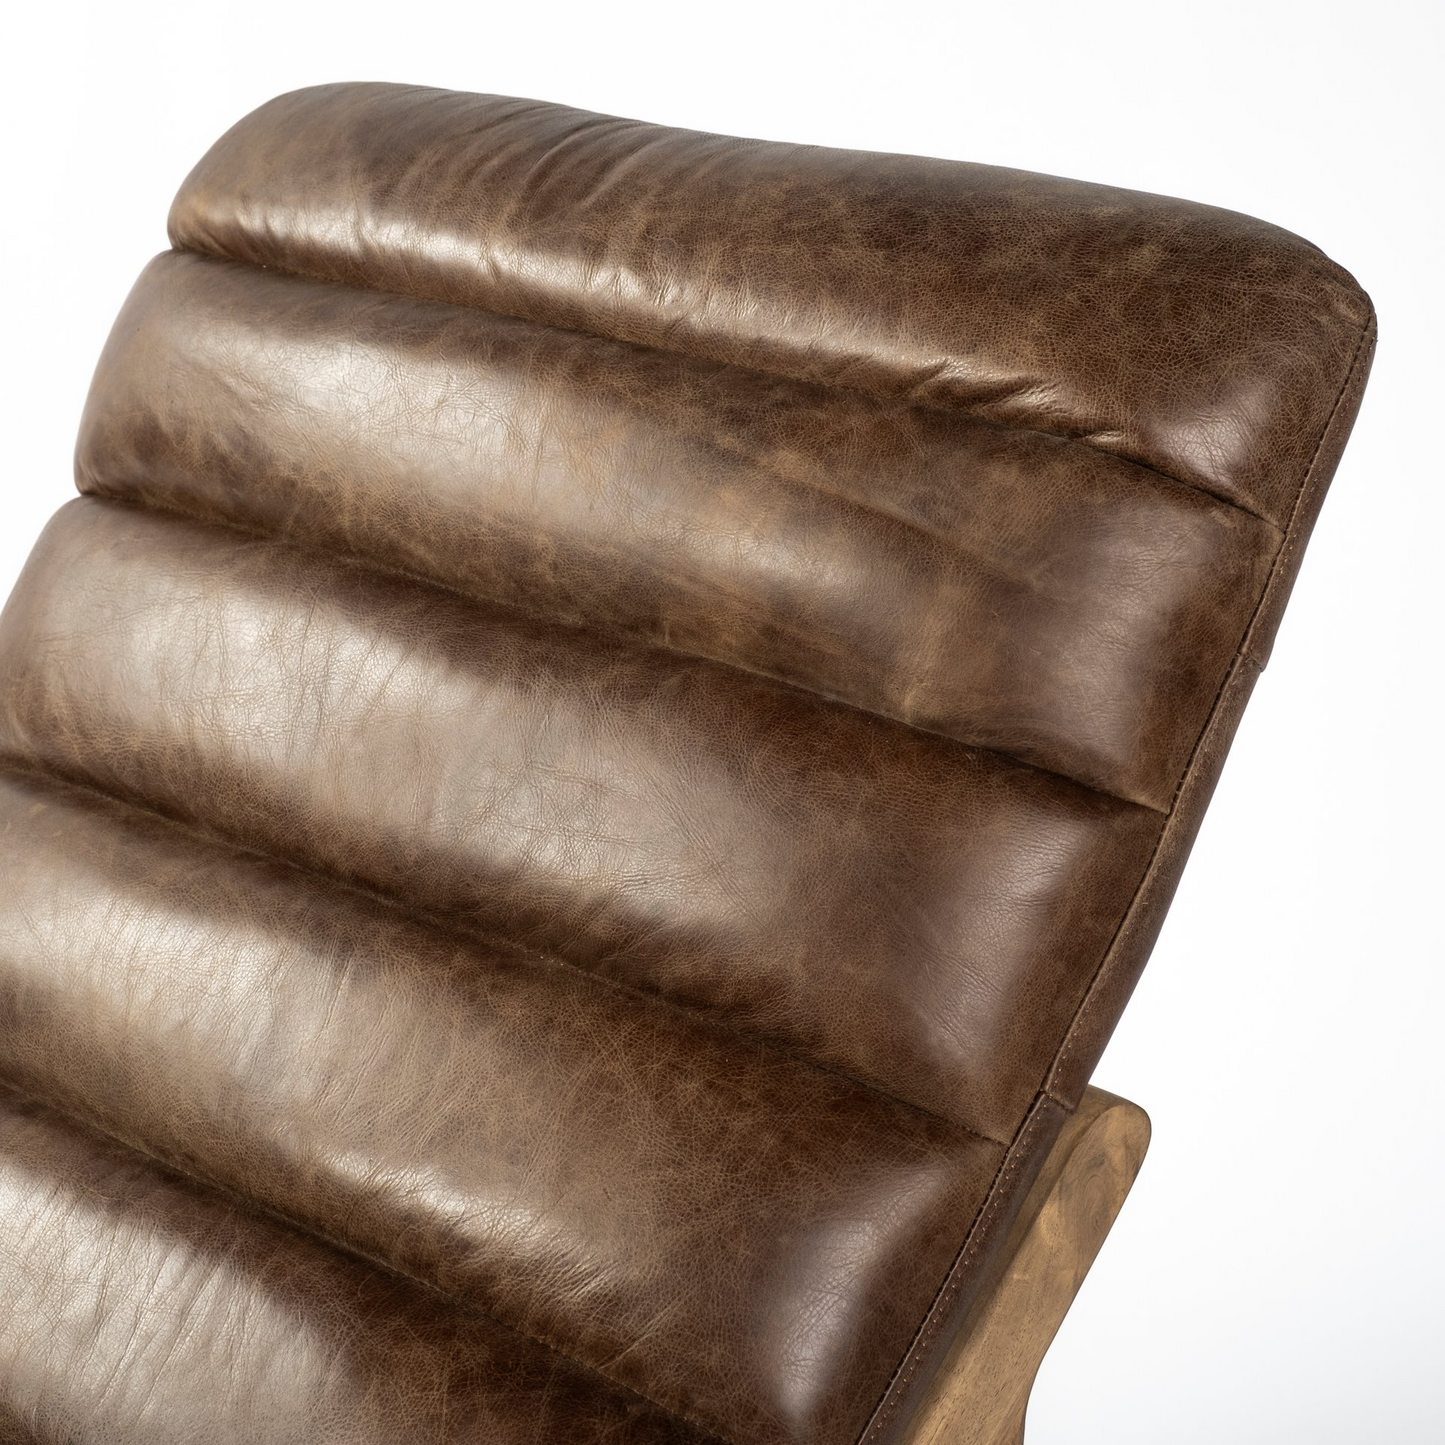 Genuine Leather Chaise Lounge Chair - Modern Brown